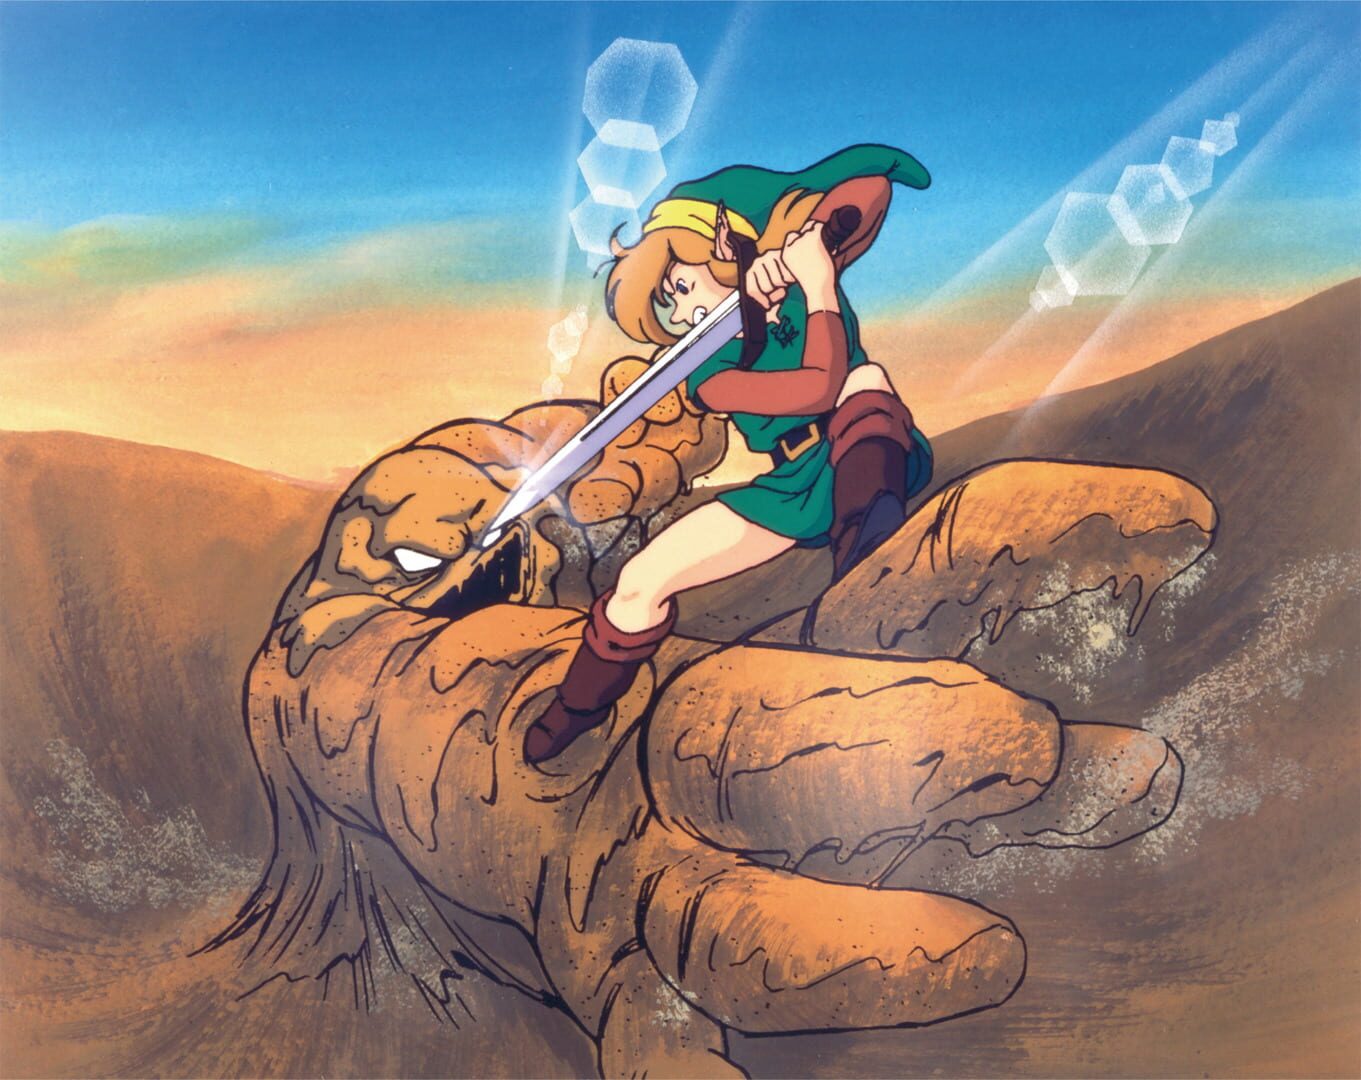 Arte - The Legend of Zelda: A Link to the Past